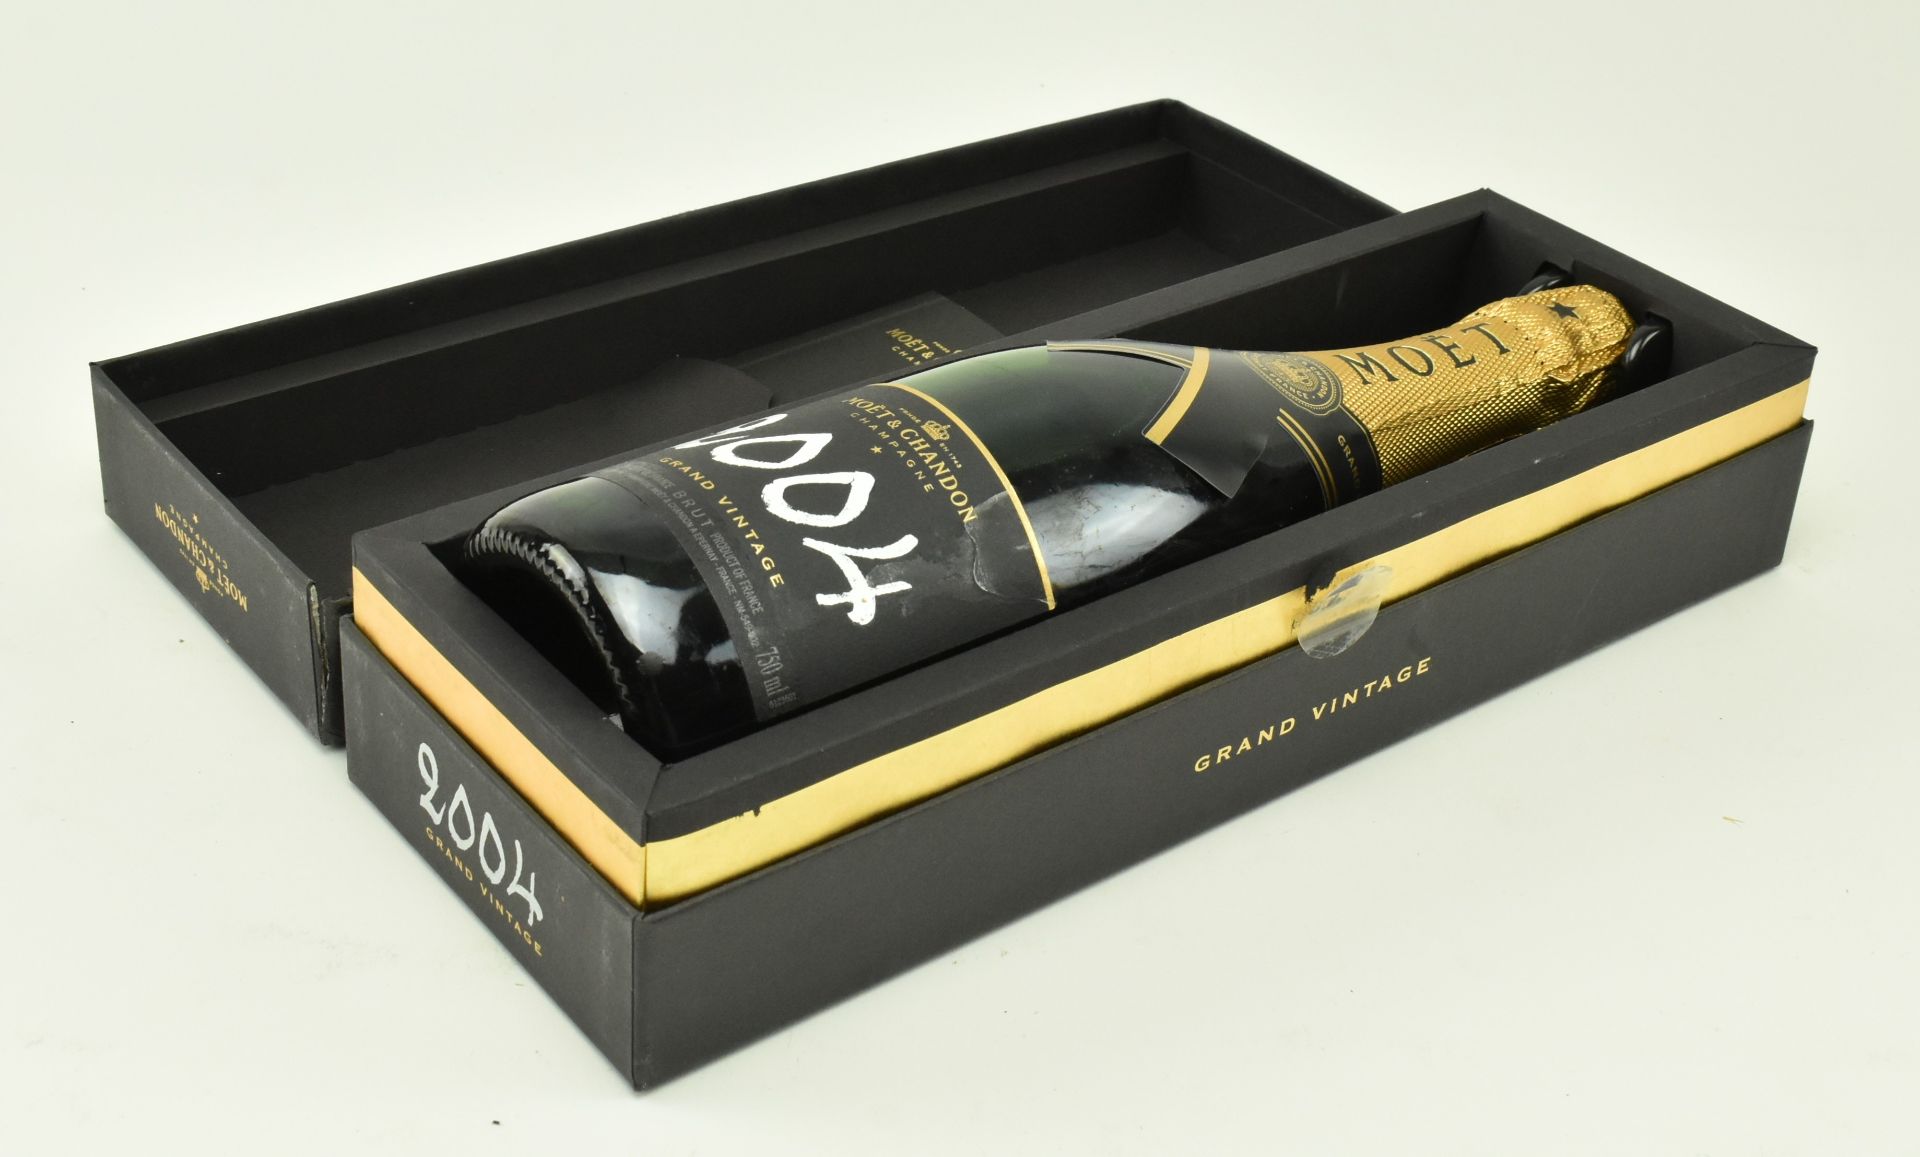 MOET & CHANDON CHAMPAGNE 2004 GRAND VINTAGE, BOXED - Image 8 of 9